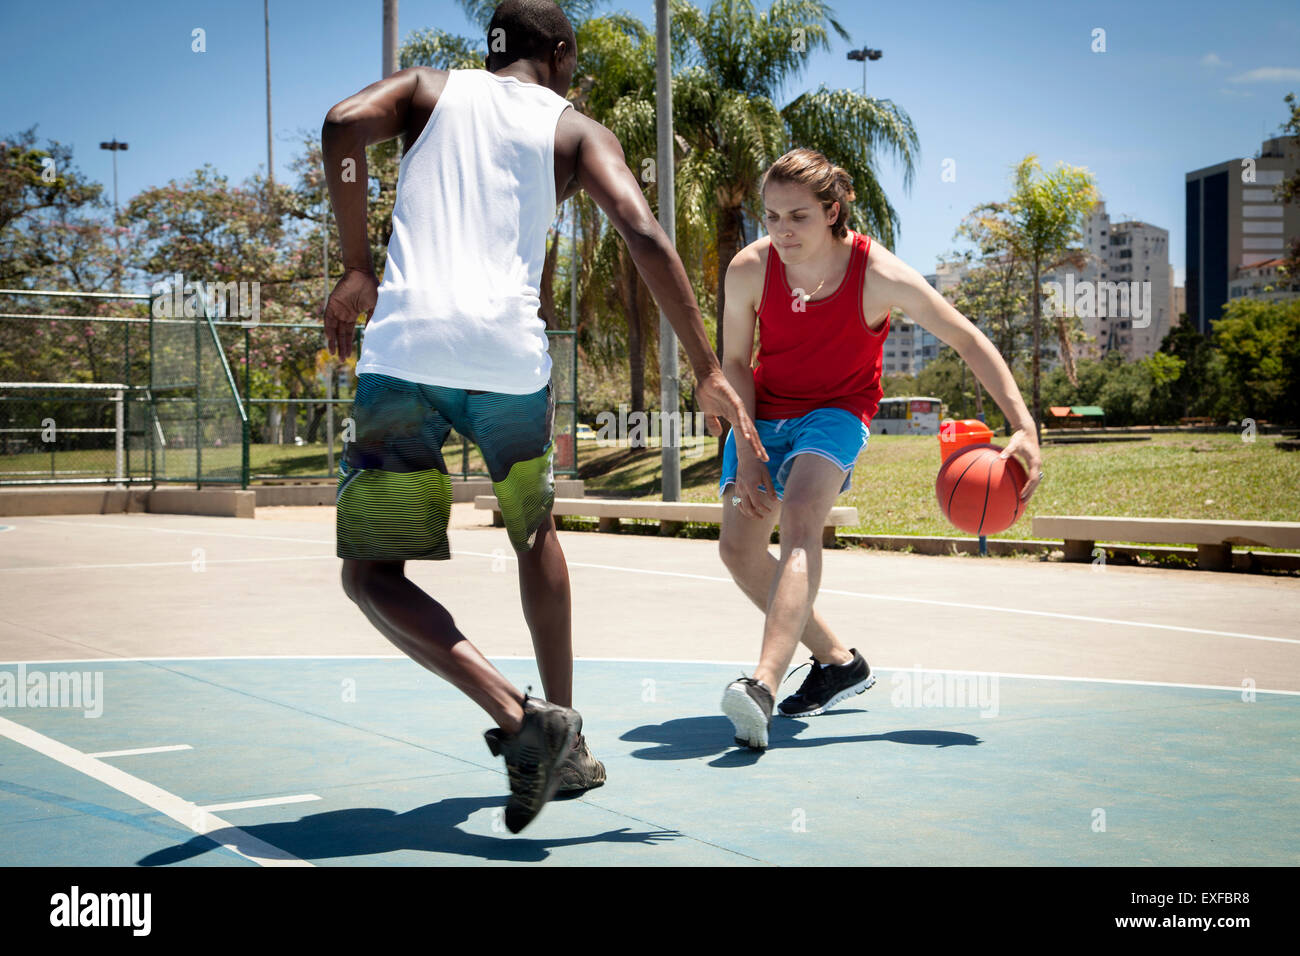 Young men practicing basketball on basketball court Stock Photo